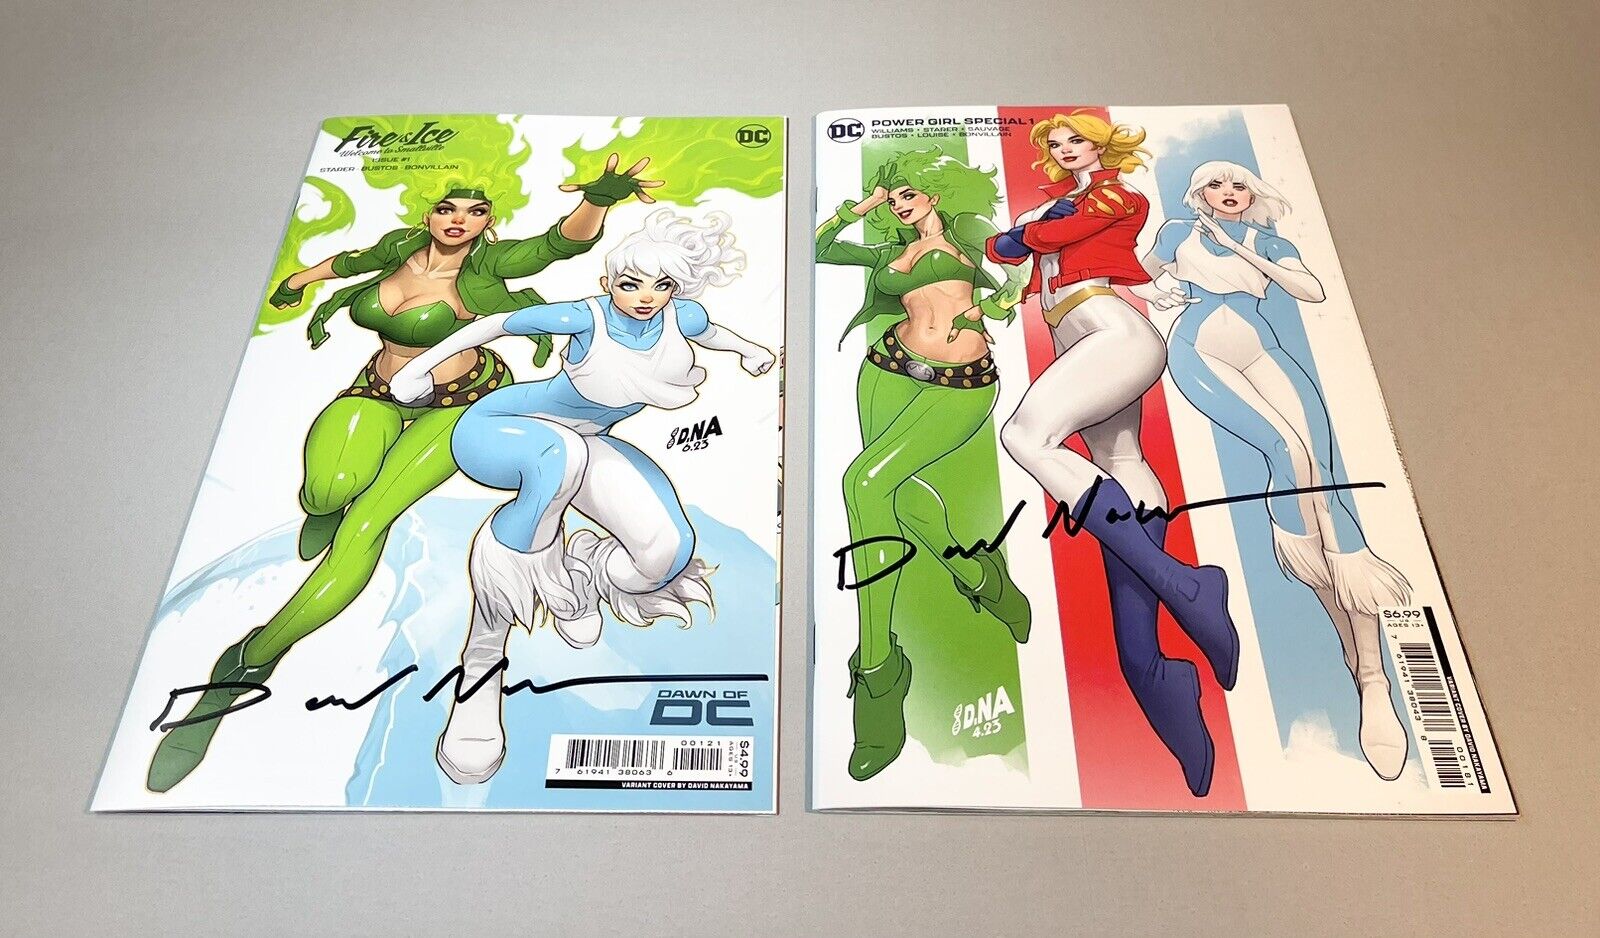 Beautiful Signed David Nakayama Covers Fire And Ice + Power Girl Special #1’s.